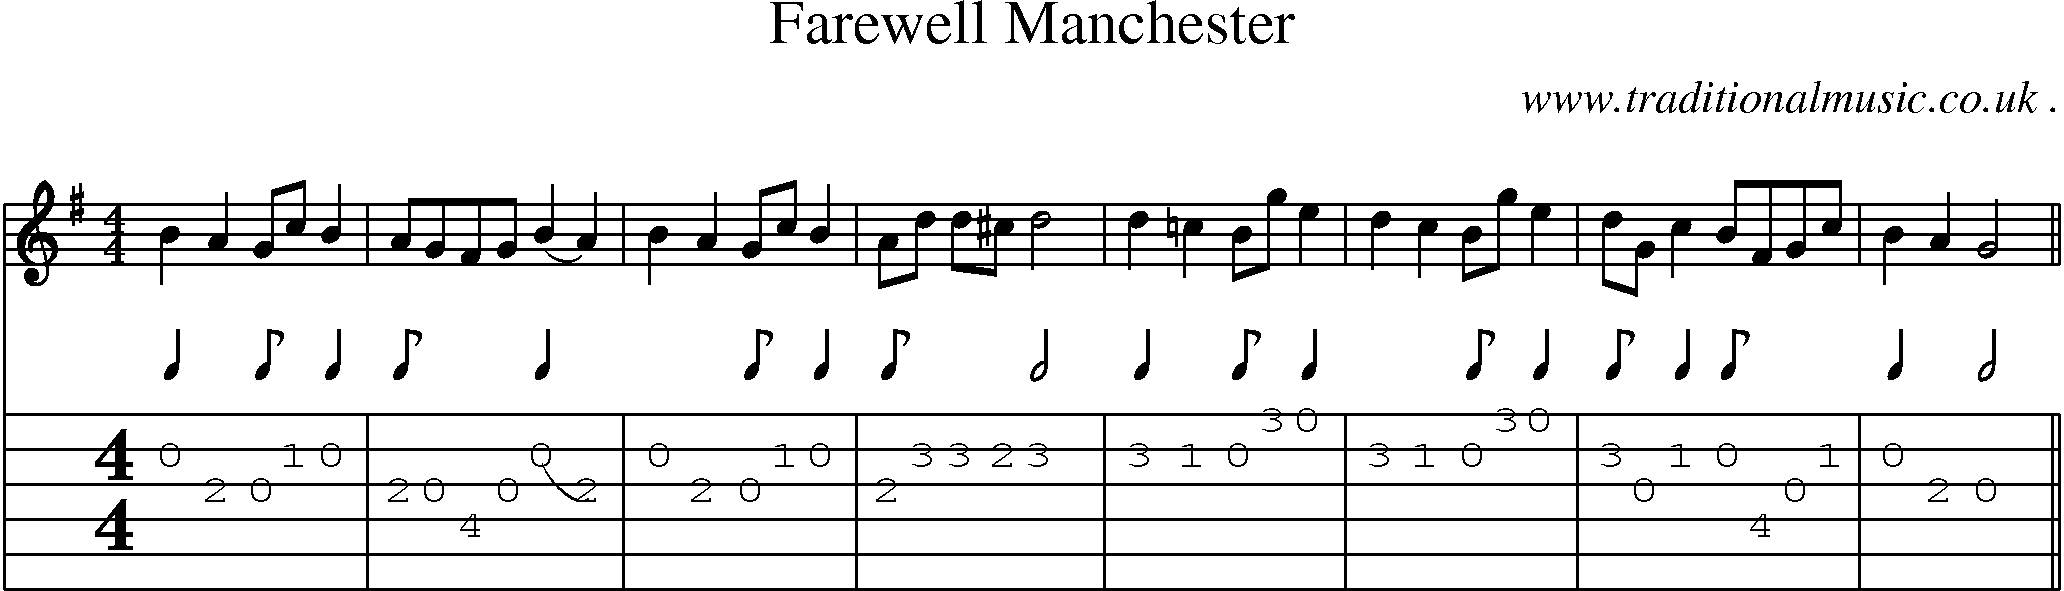 Sheet-Music and Guitar Tabs for Farewell Manchester